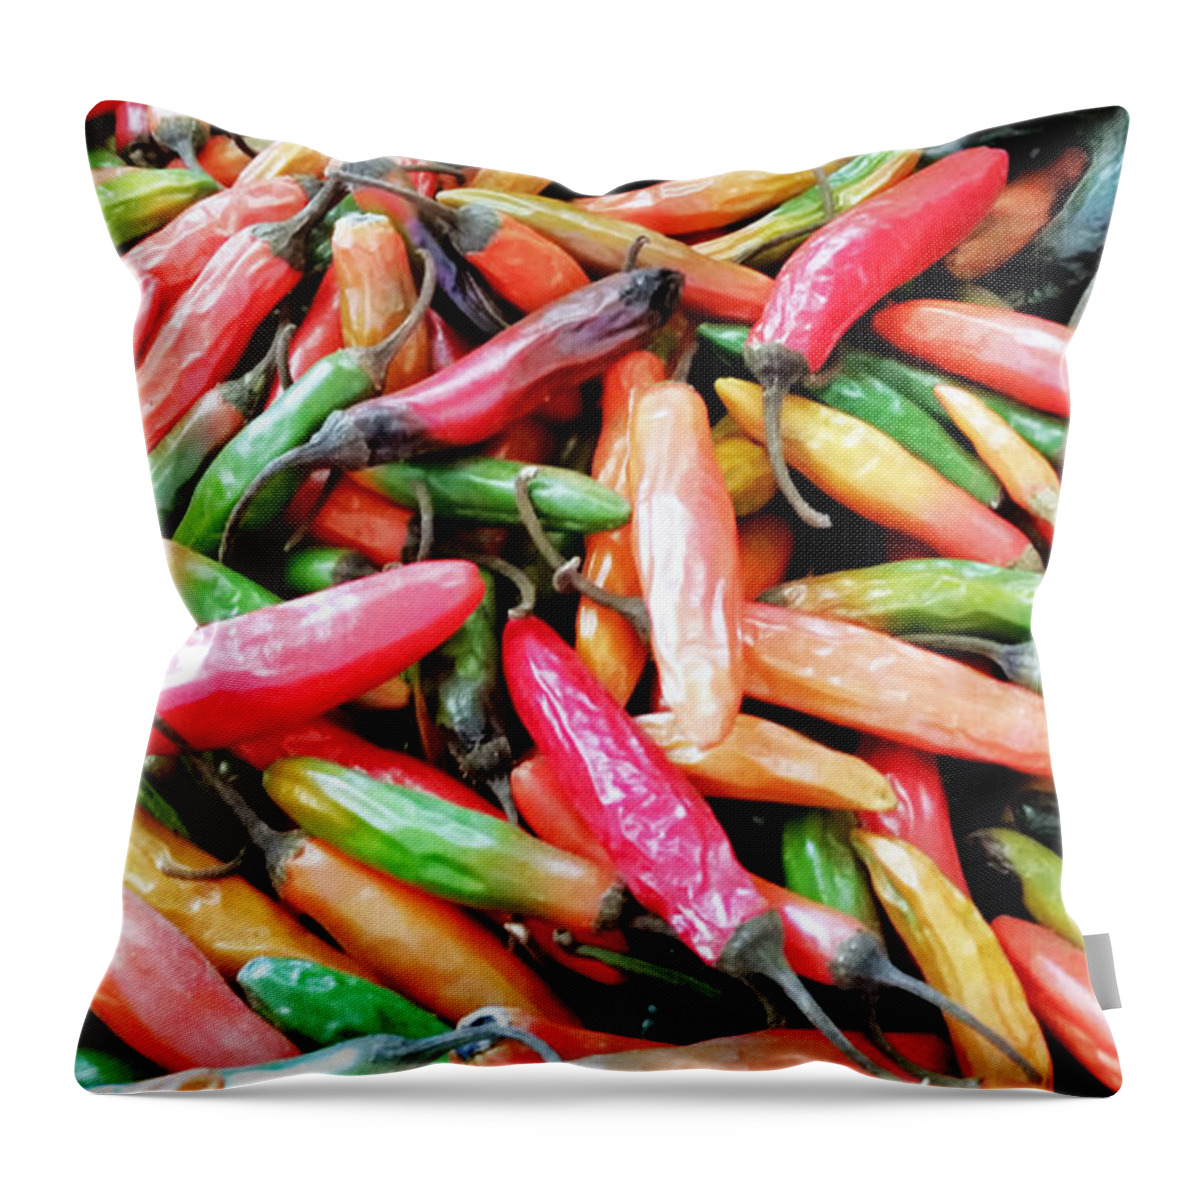 Chili Peppers Throw Pillow featuring the photograph Something's Burning In The Kitchen by Lara Ellis